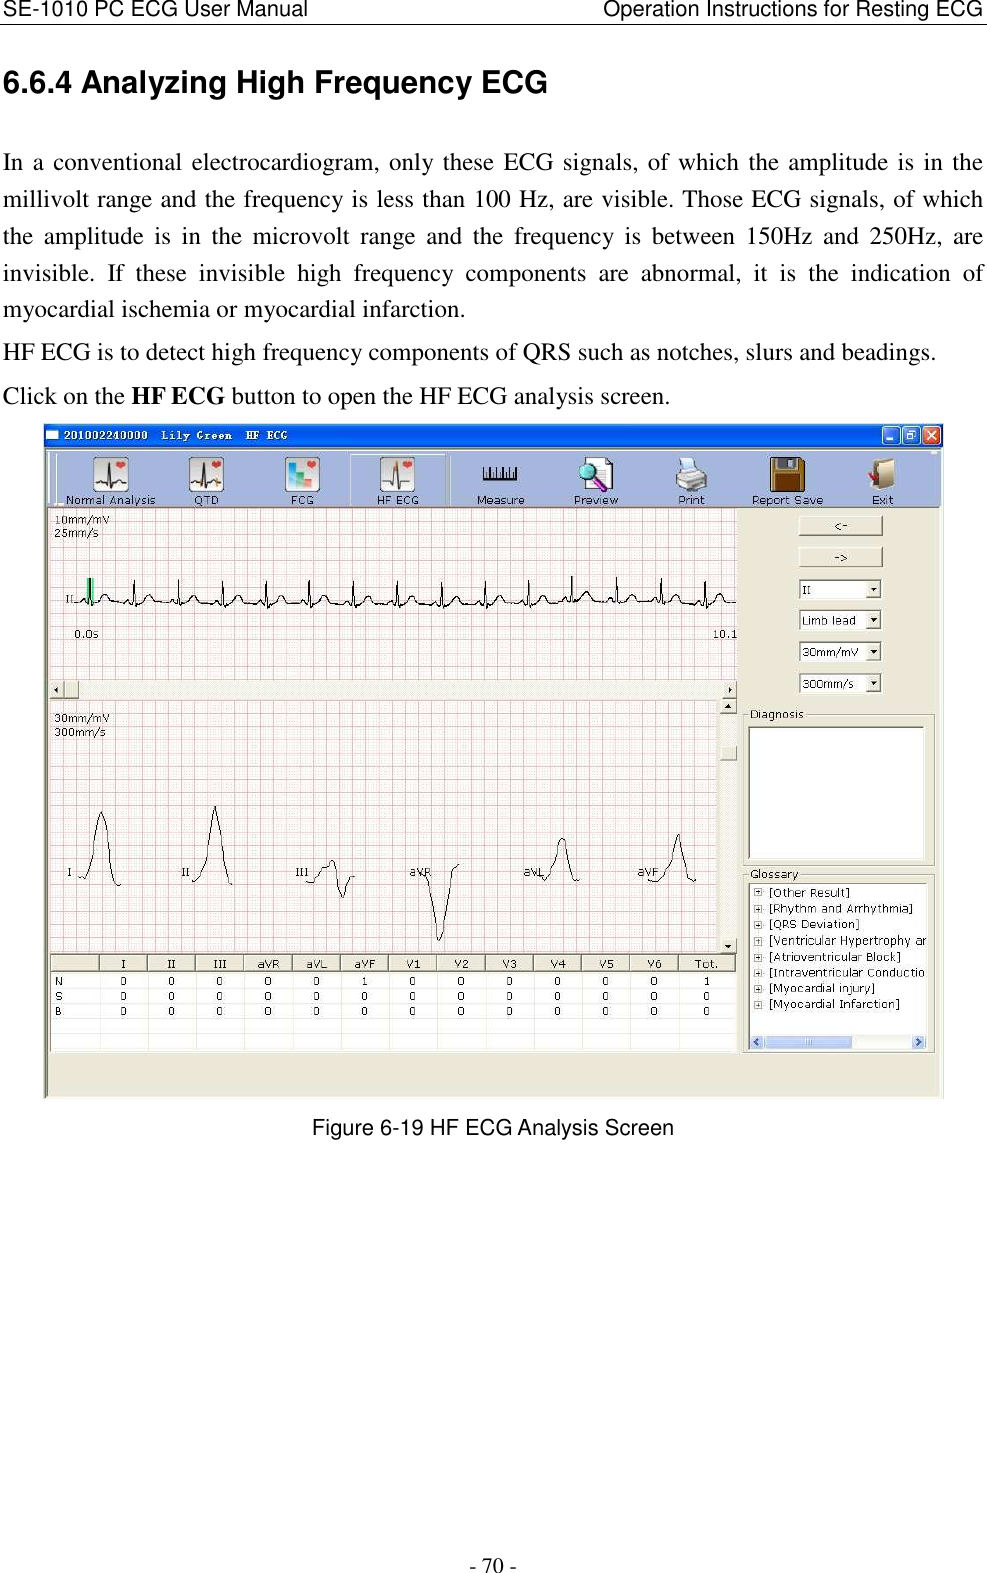 SE-1010 PC ECG User Manual                                                      Operation Instructions for Resting ECG - 70 - 6.6.4 Analyzing High Frequency ECG In a conventional electrocardiogram, only these ECG signals, of which the amplitude is in the millivolt range and the frequency is less than 100 Hz, are visible. Those ECG signals, of which the  amplitude  is  in  the  microvolt  range  and  the  frequency  is  between  150Hz  and  250Hz,  are invisible.  If  these  invisible  high  frequency  components  are  abnormal,  it  is  the  indication  of myocardial ischemia or myocardial infarction. HF ECG is to detect high frequency components of QRS such as notches, slurs and beadings. Click on the HF ECG button to open the HF ECG analysis screen.  Figure 6-19 HF ECG Analysis Screen 